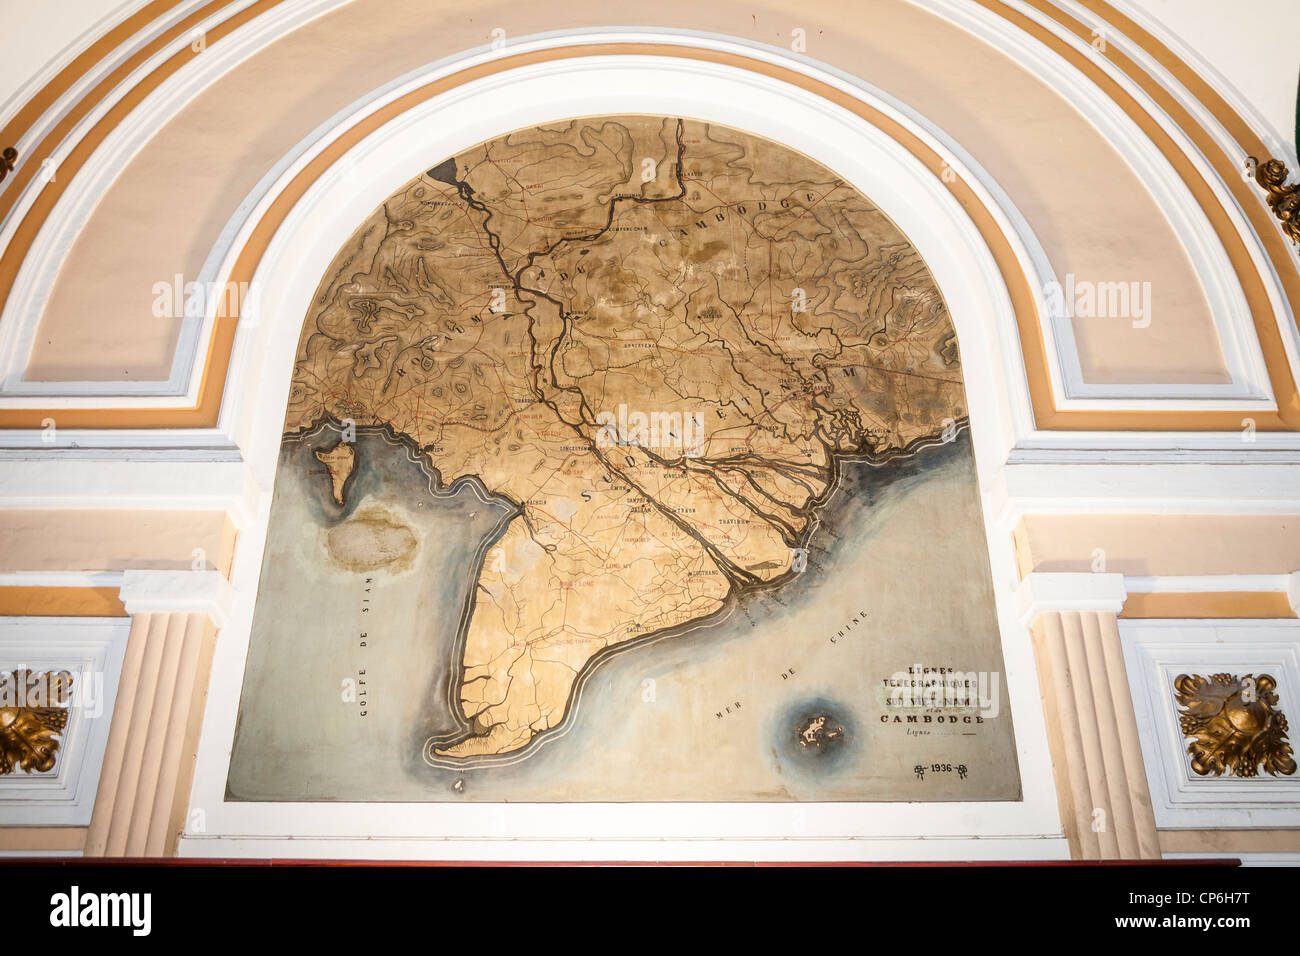 Map of South Vietnam and Cambodia, on wall inside Central Post Office, Ho Chi Minh City, (Saigon), Vietnam Stock Photo